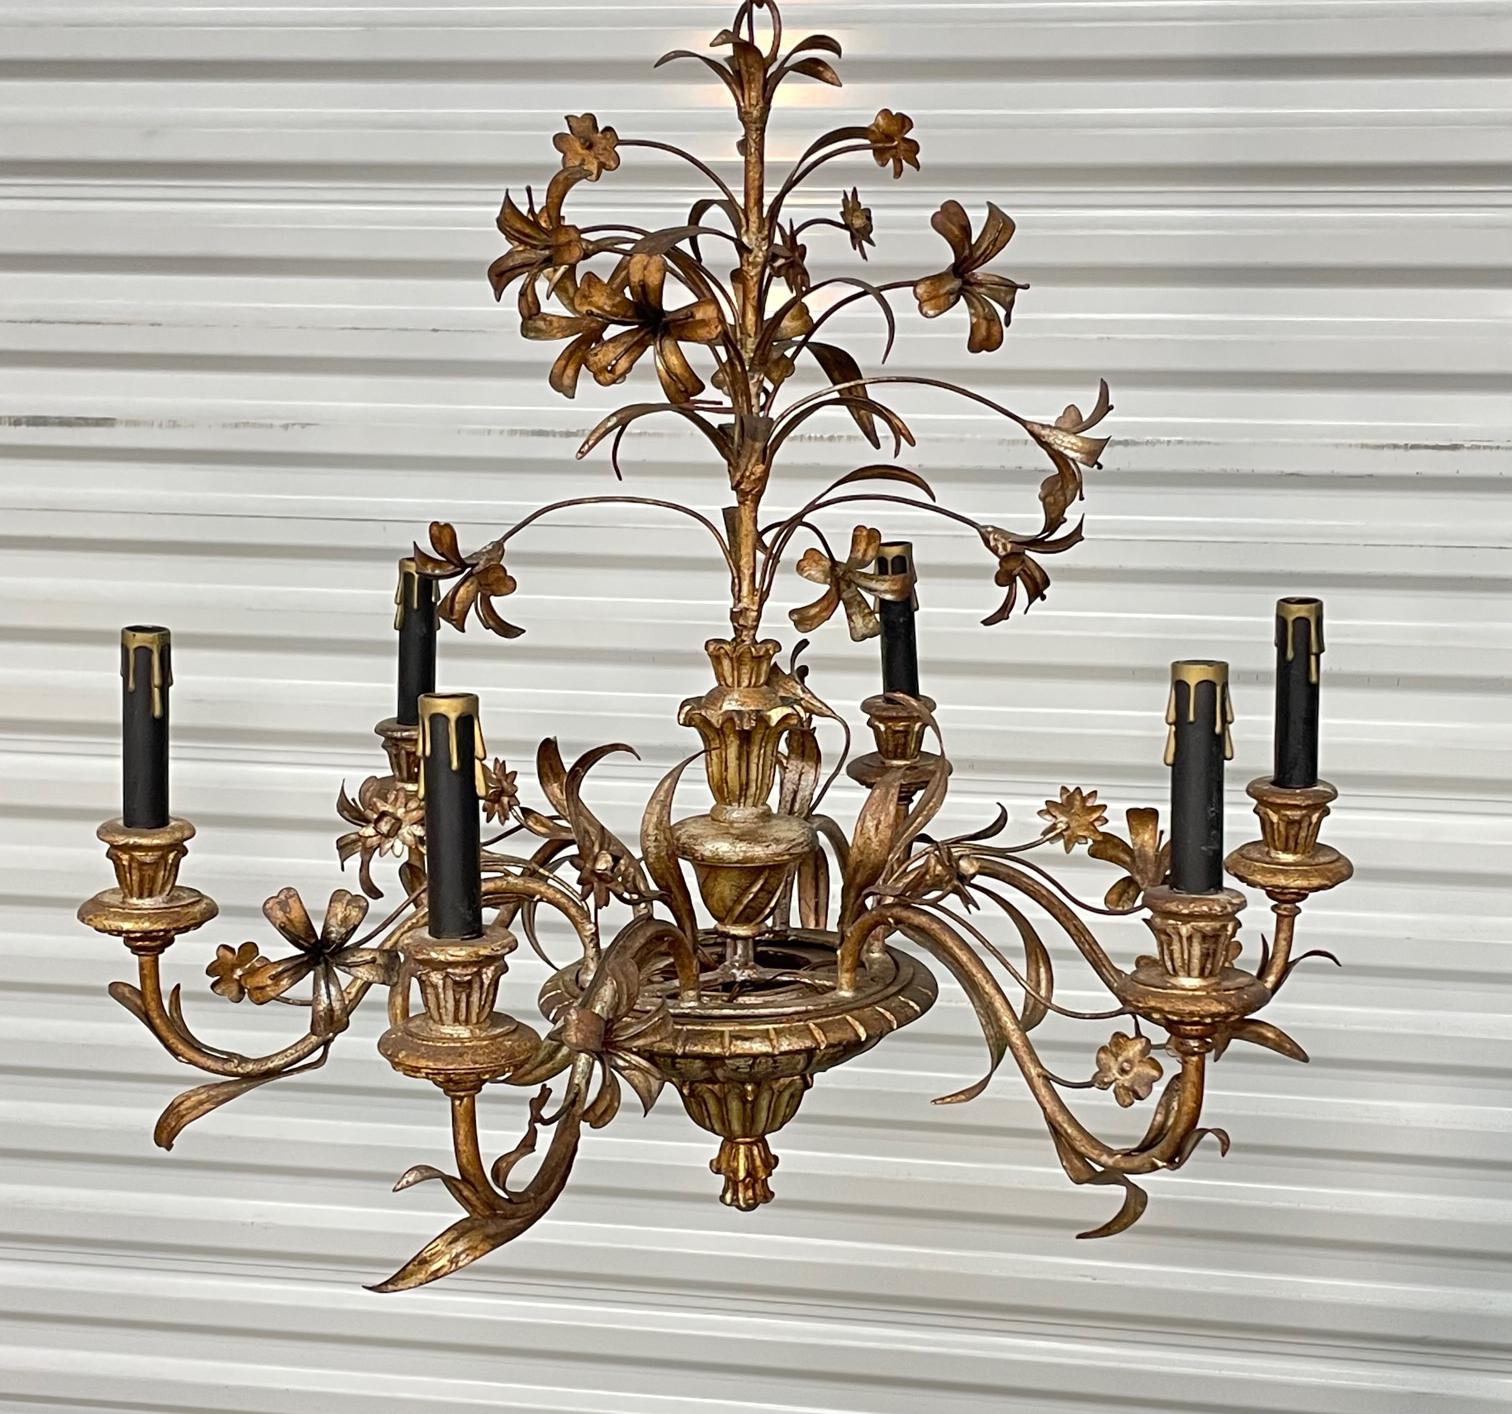 Beautiful Italian tole floral six-light chandelier in gold gilt. Made in Italy hang tag still present.  Good vintage condition with minor imperfections consistent with age.
For a shipping quote to your exact zip code, please message us.
